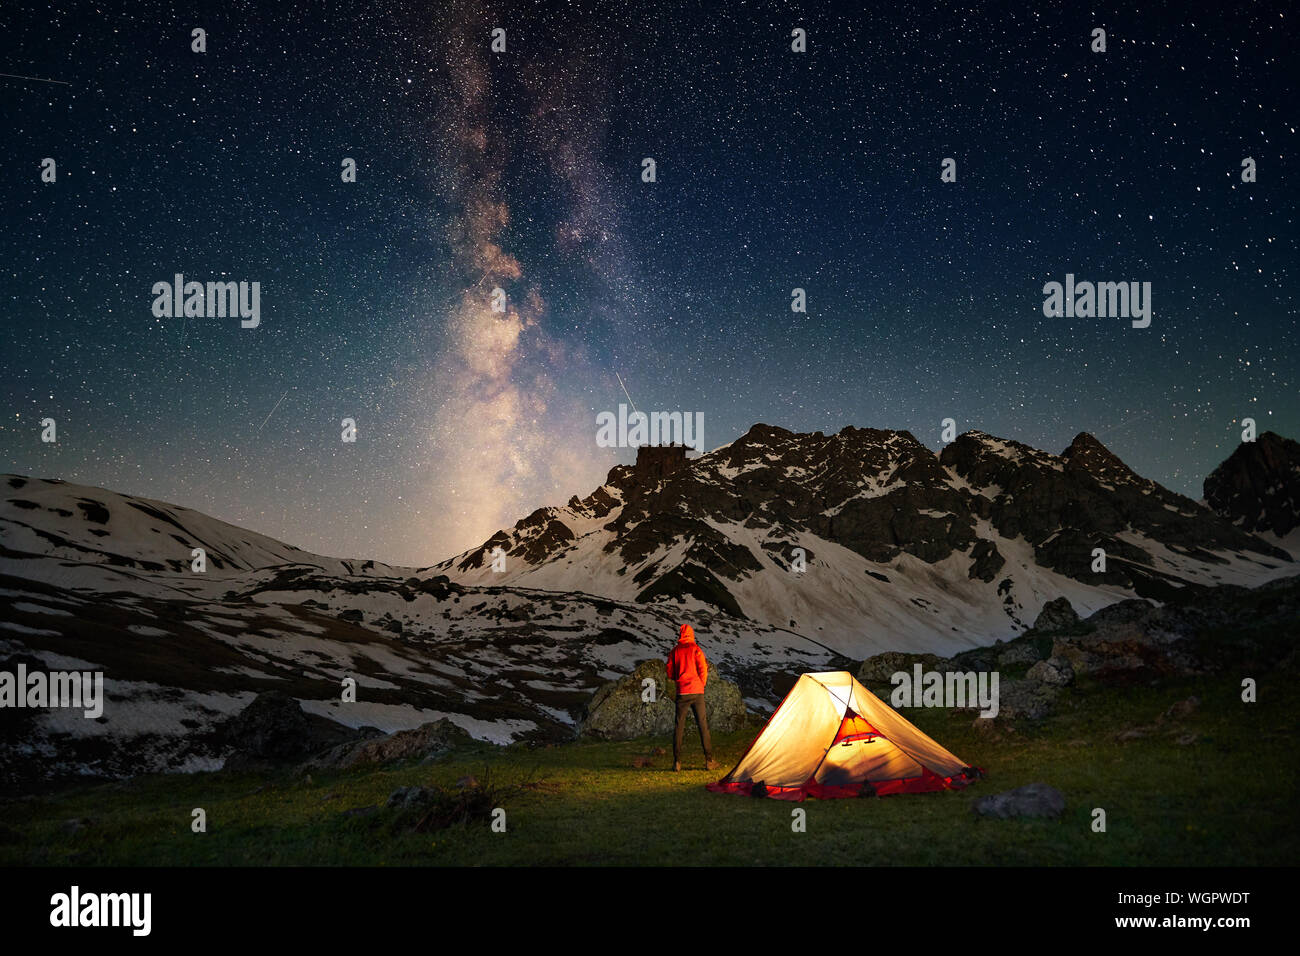 Hiker standing near tent and looking at the milky way in mountains at night Stock Photo